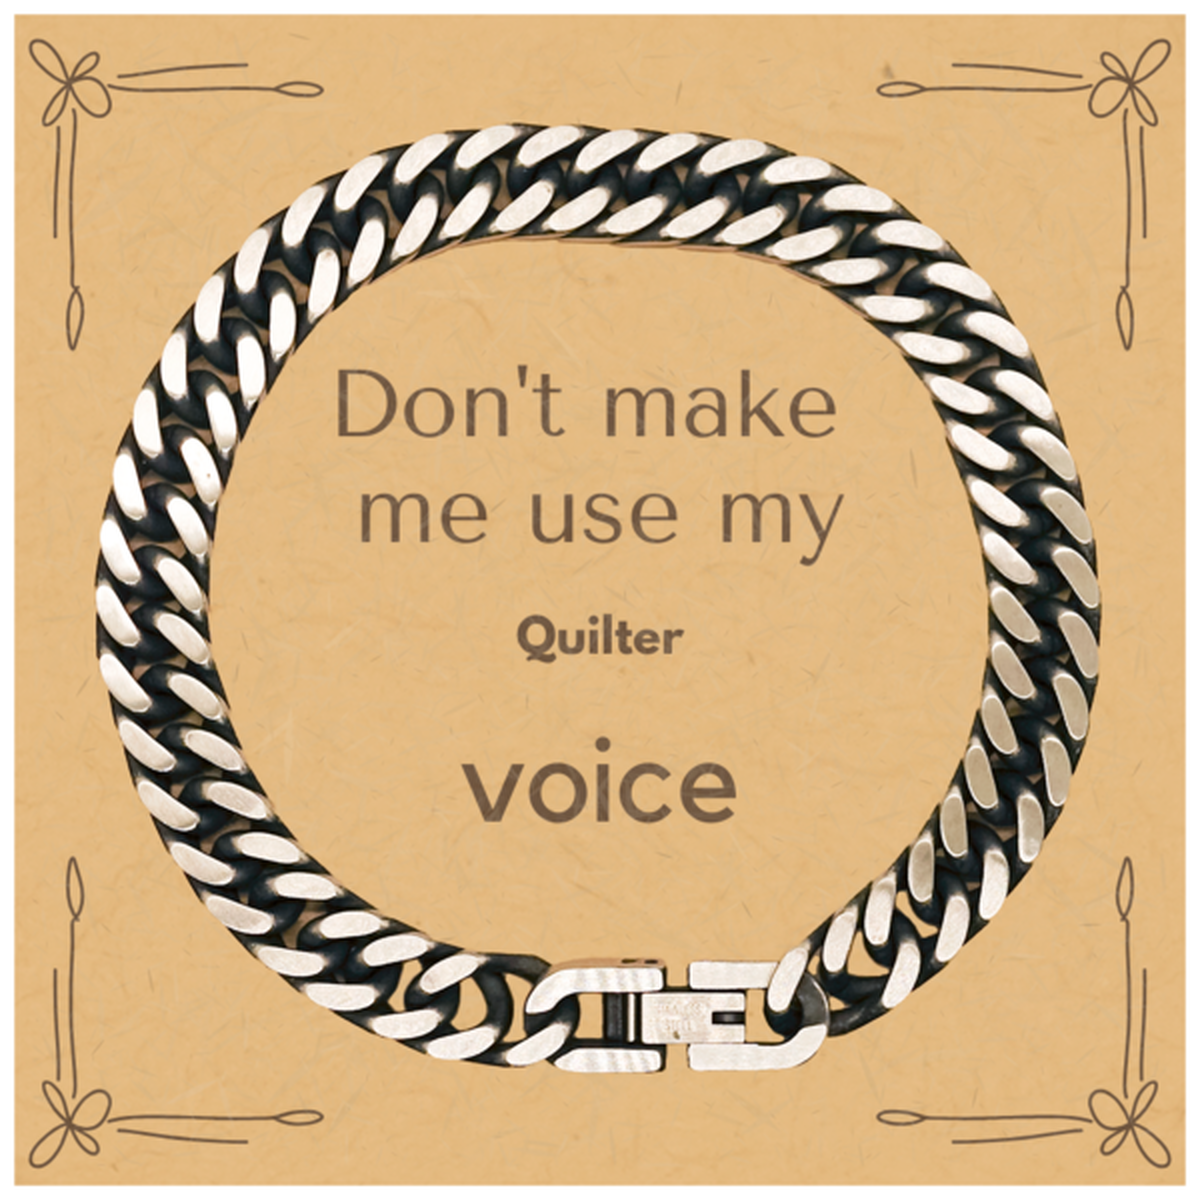 Don't make me use my Quilter voice, Sarcasm Quilter Card Gifts, Christmas Quilter Cuban Link Chain Bracelet Birthday Unique Gifts For Quilter Coworkers, Men, Women, Colleague, Friends